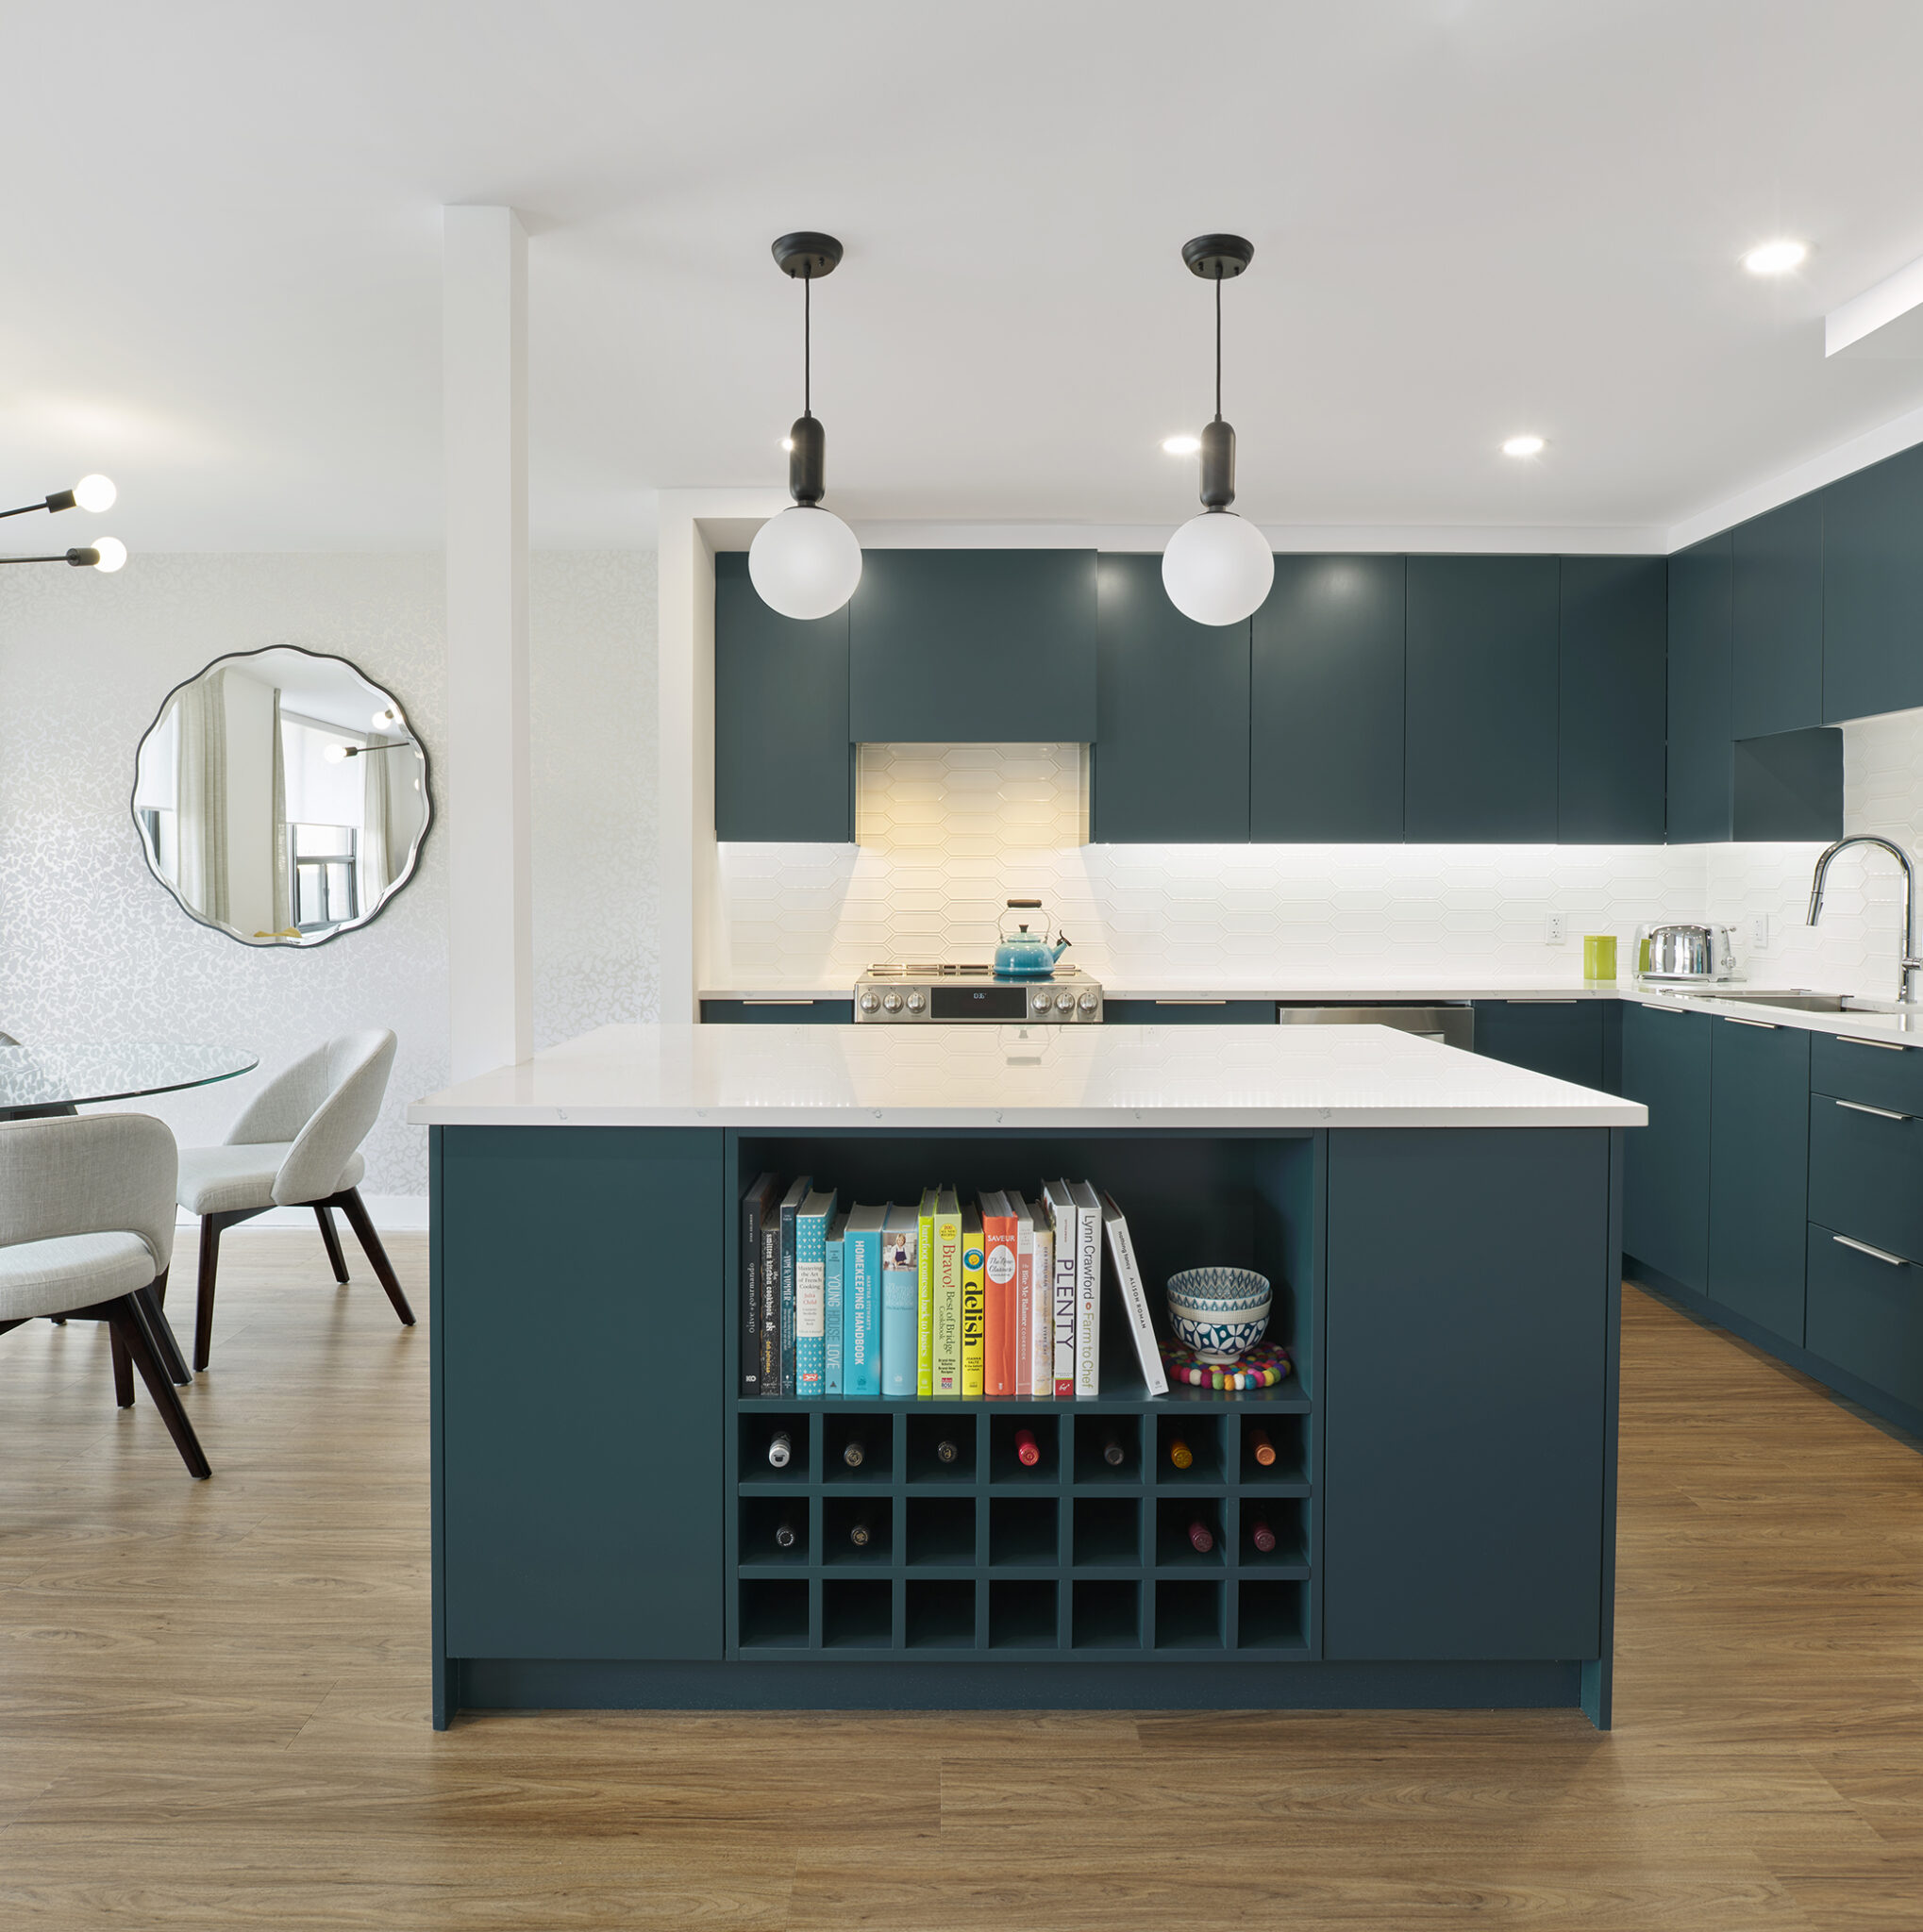 Minimalist kitchen with blue-green island and cabinets